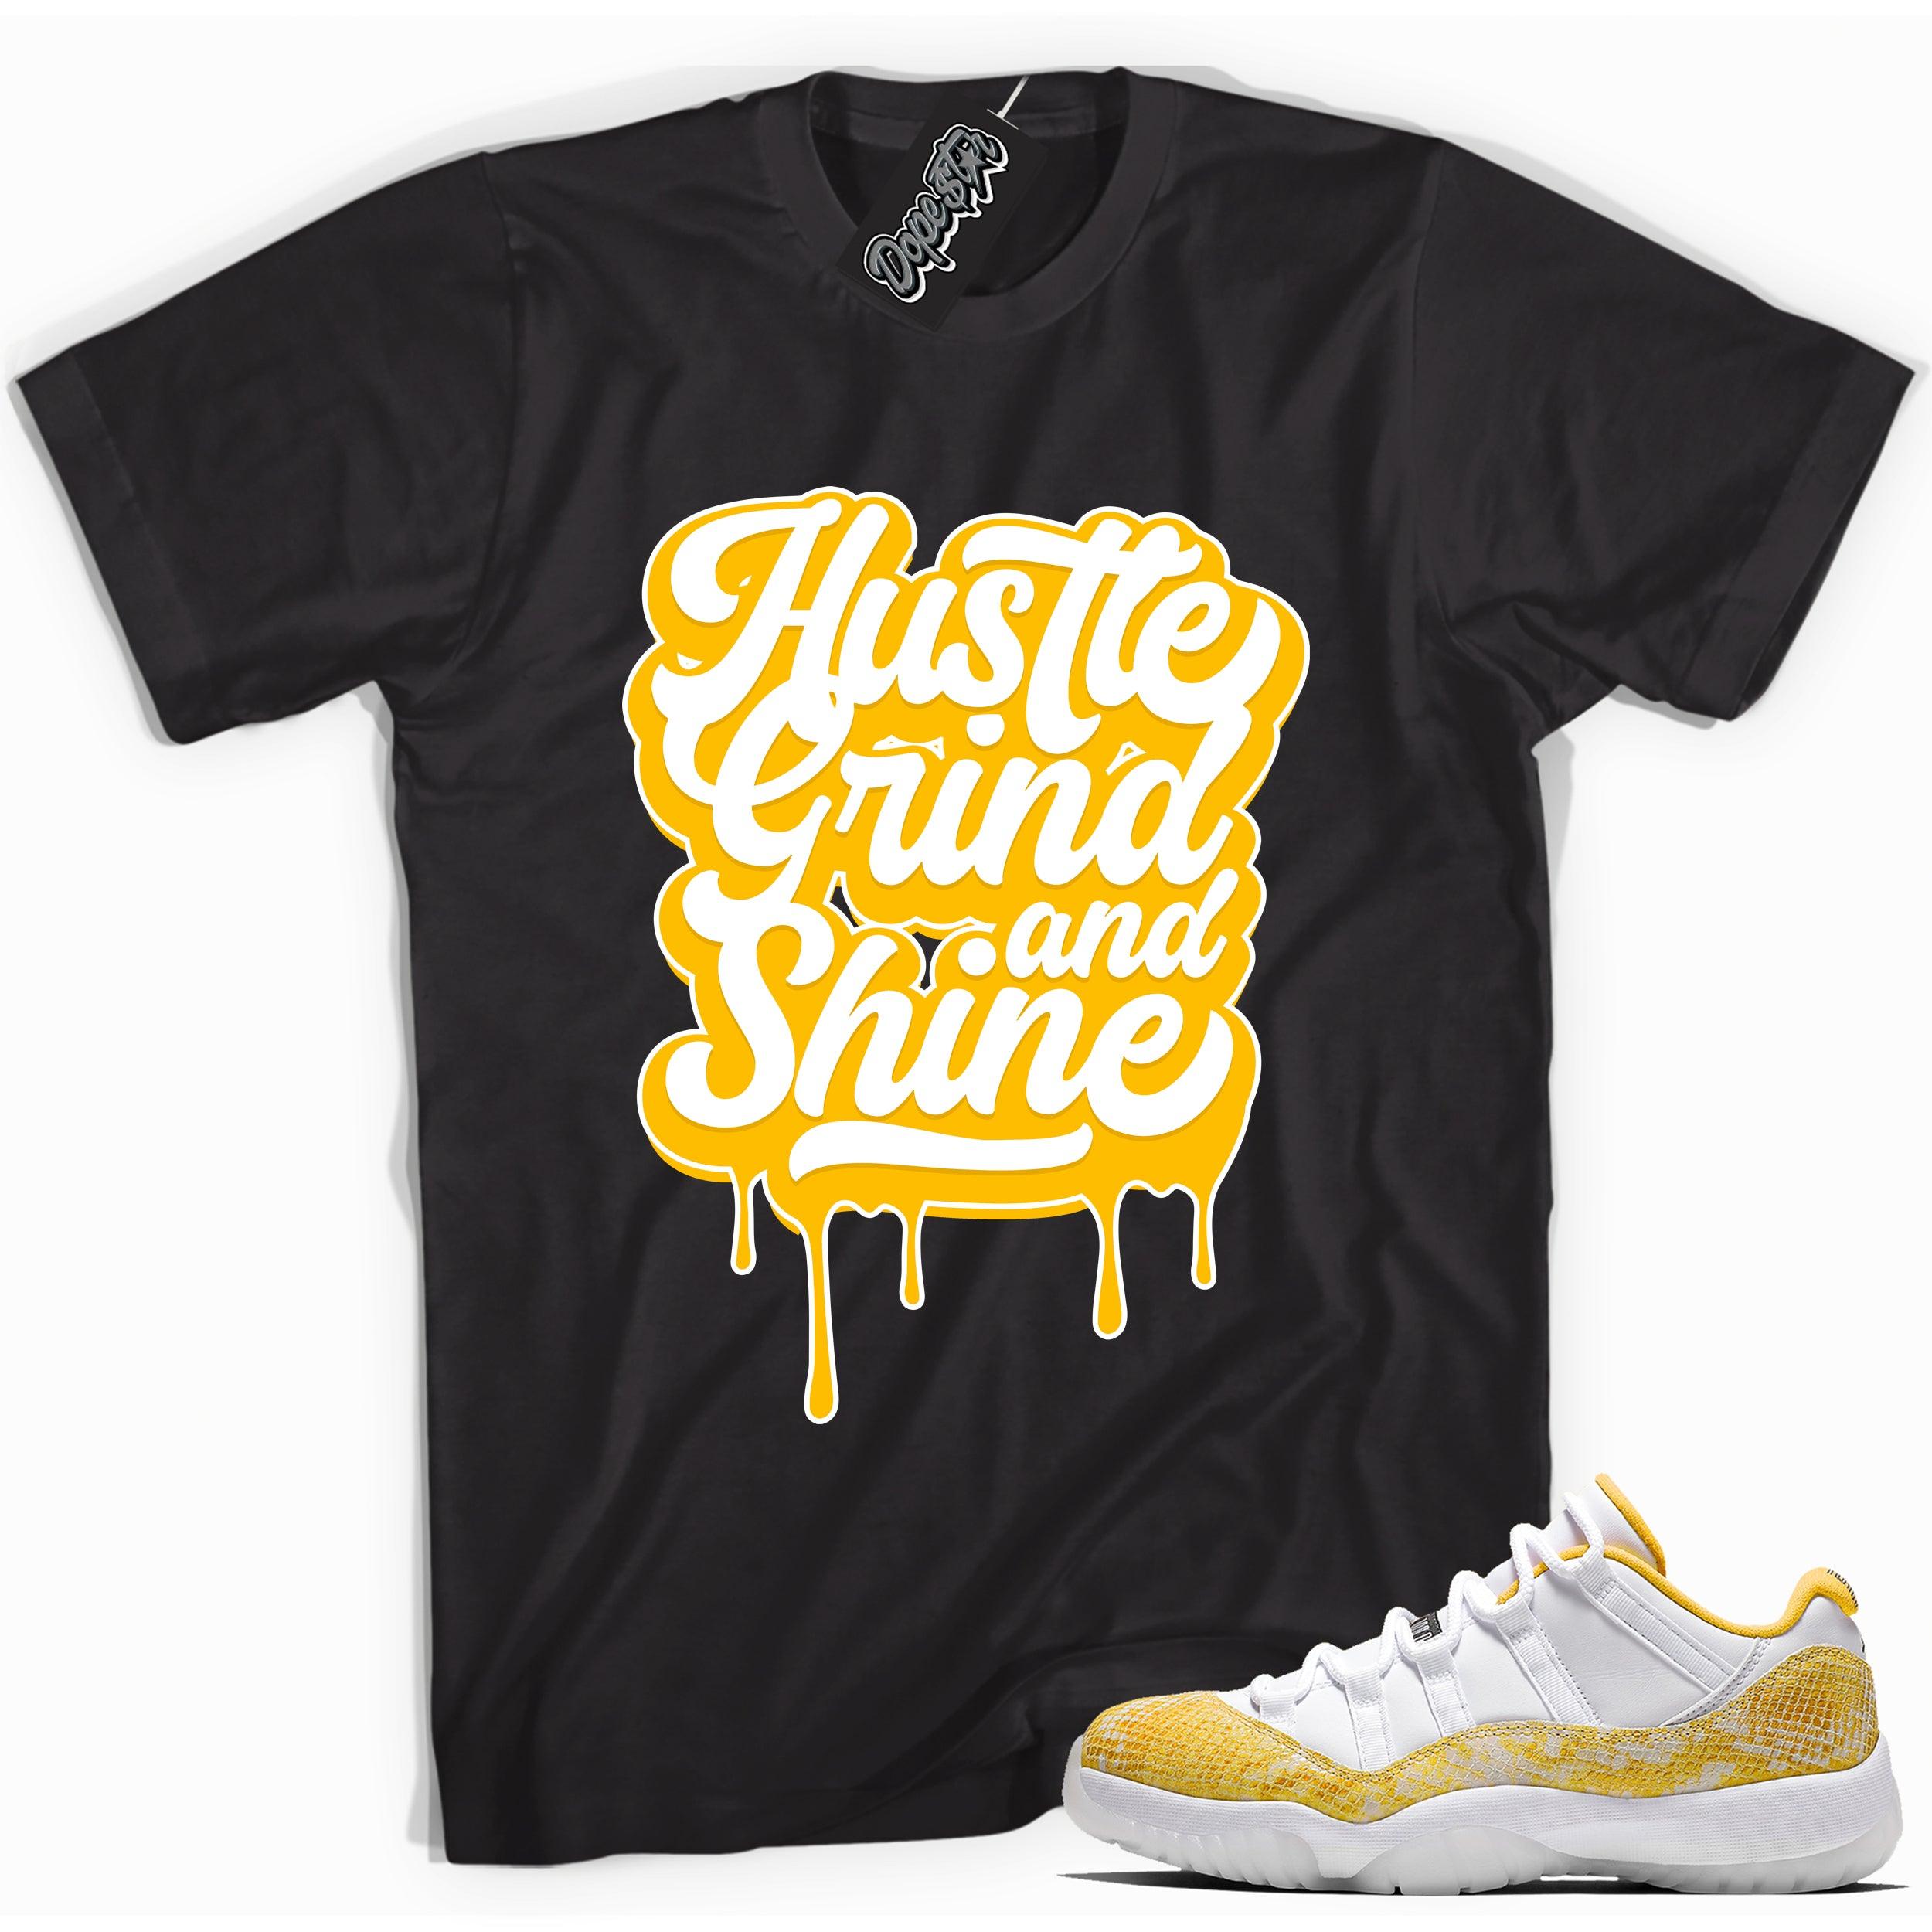 Cool black graphic tee with 'hustle grind and shine' print, that perfectly matches  Air Jordan 11 Retro Low Yellow Snakeskin sneakers